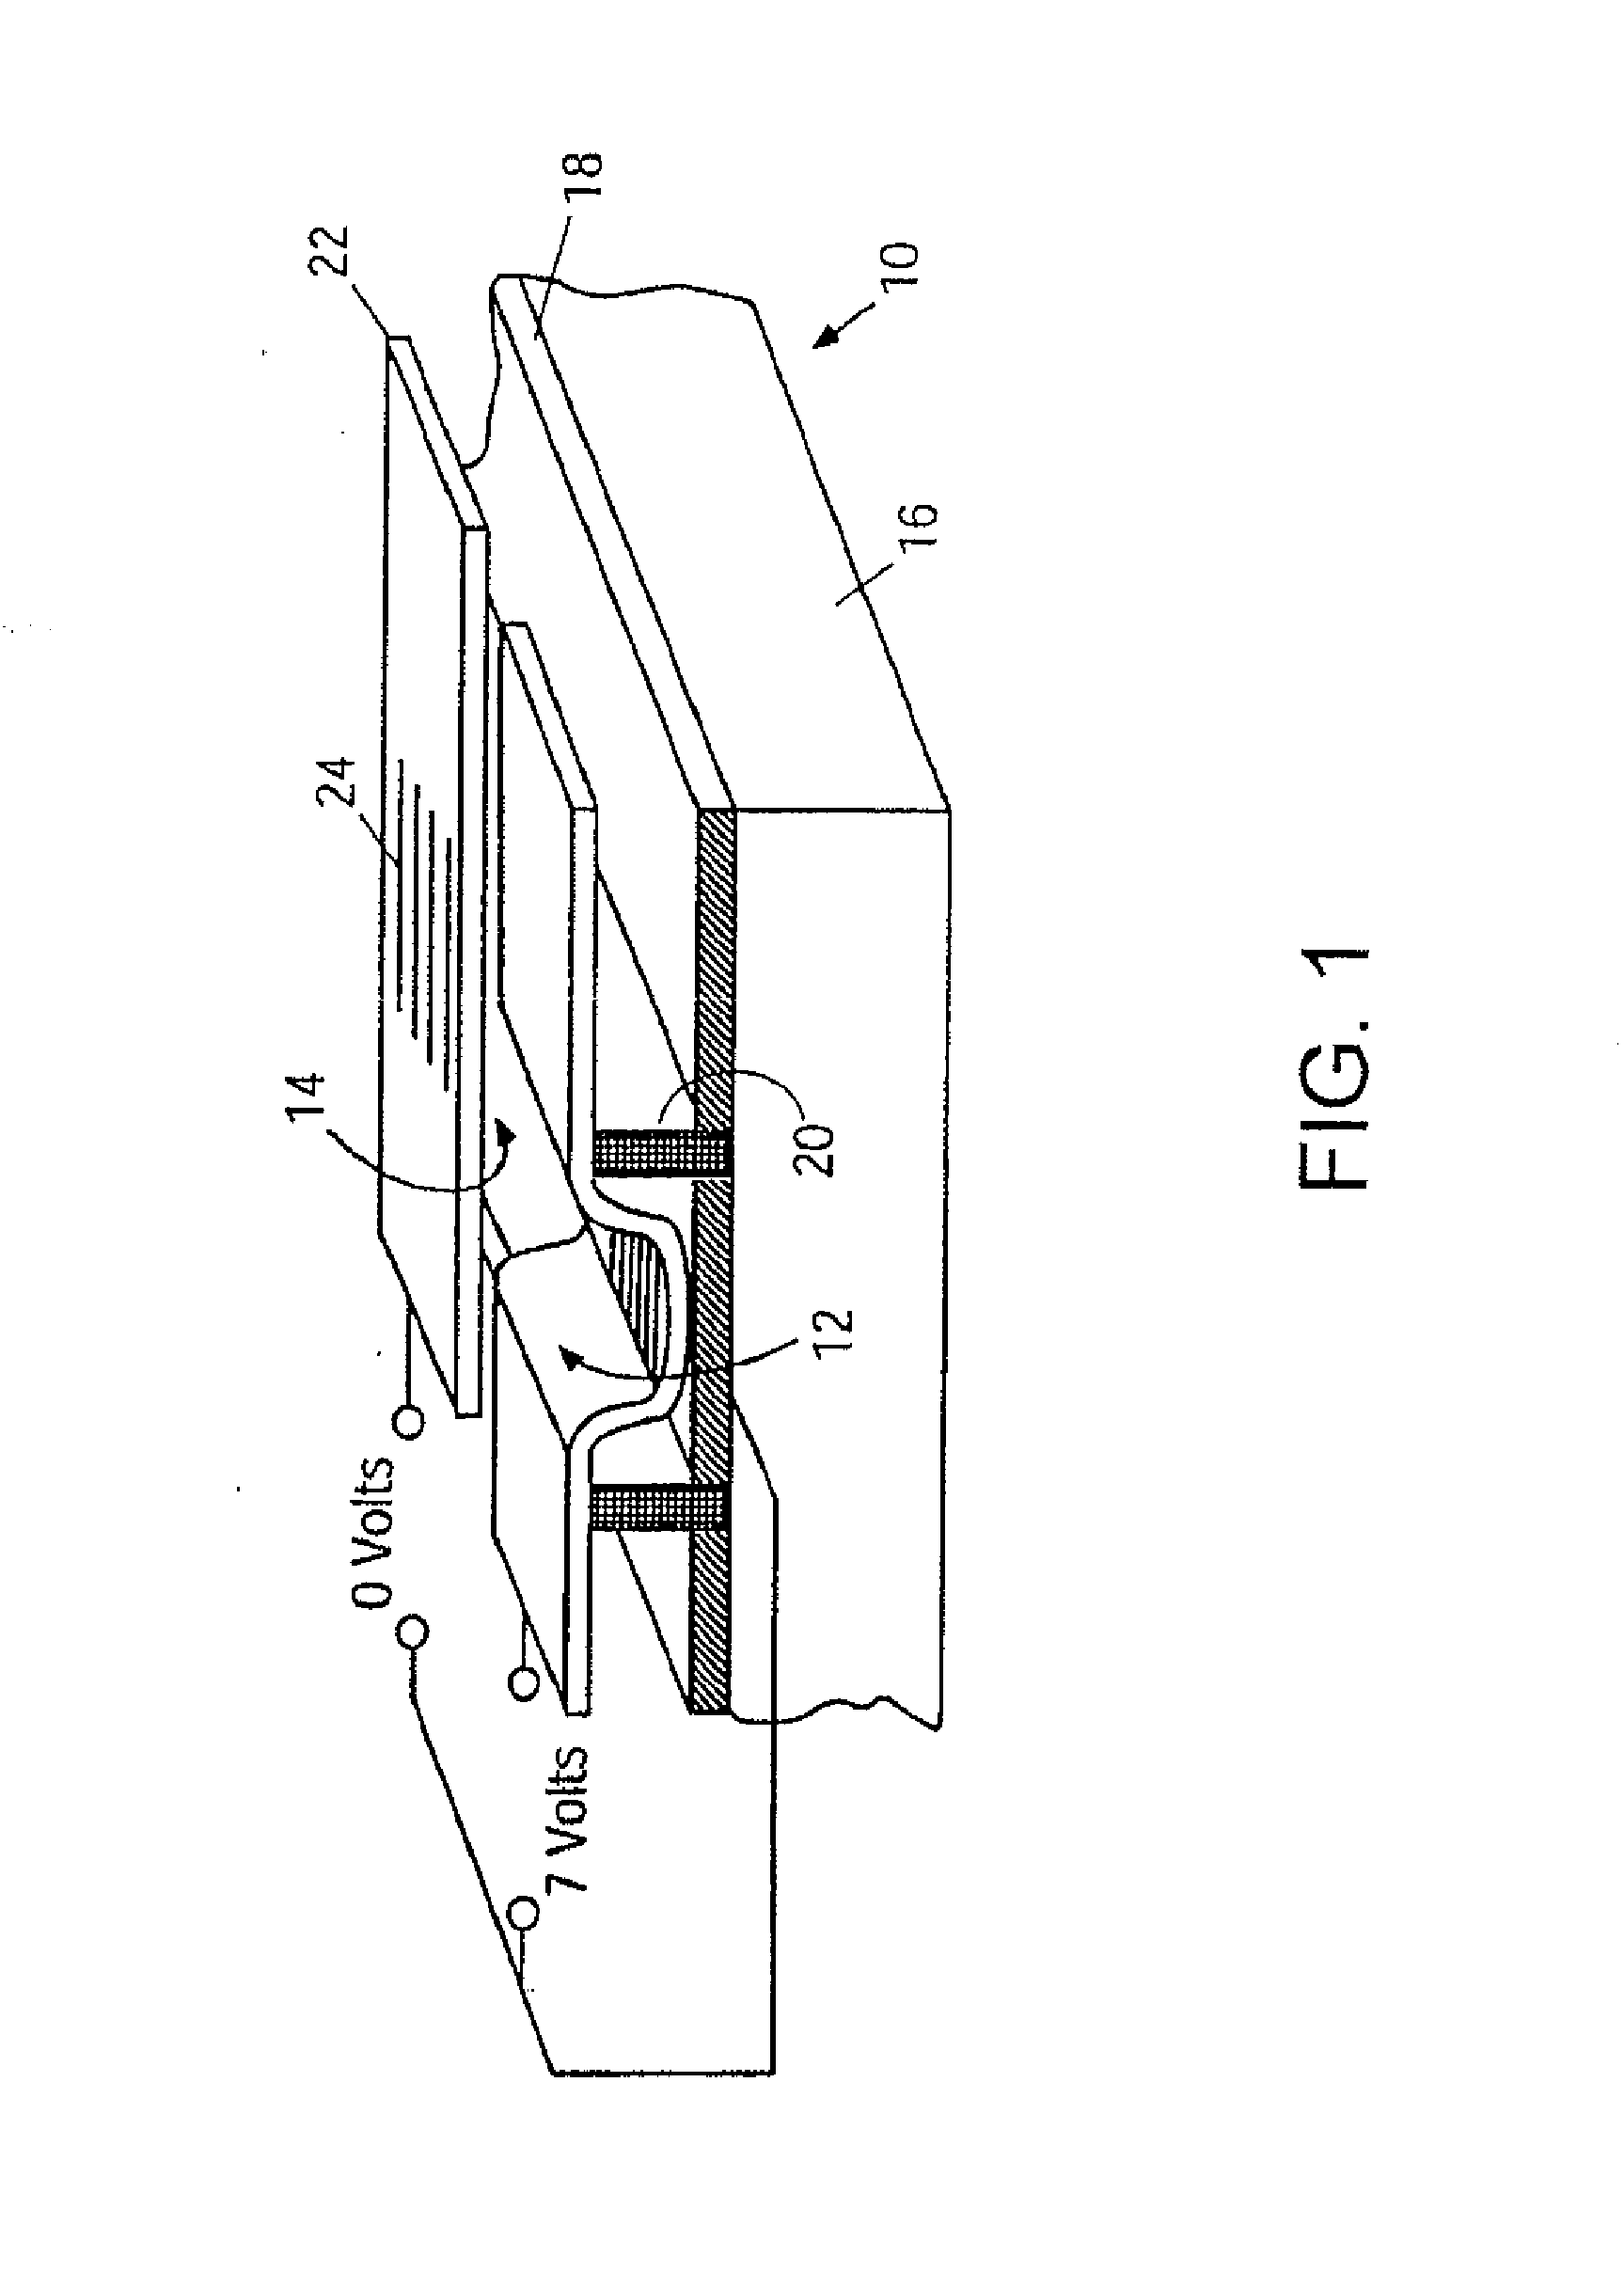 Method for fabricating a structure for a microelectromechanical systems (MEMS) device